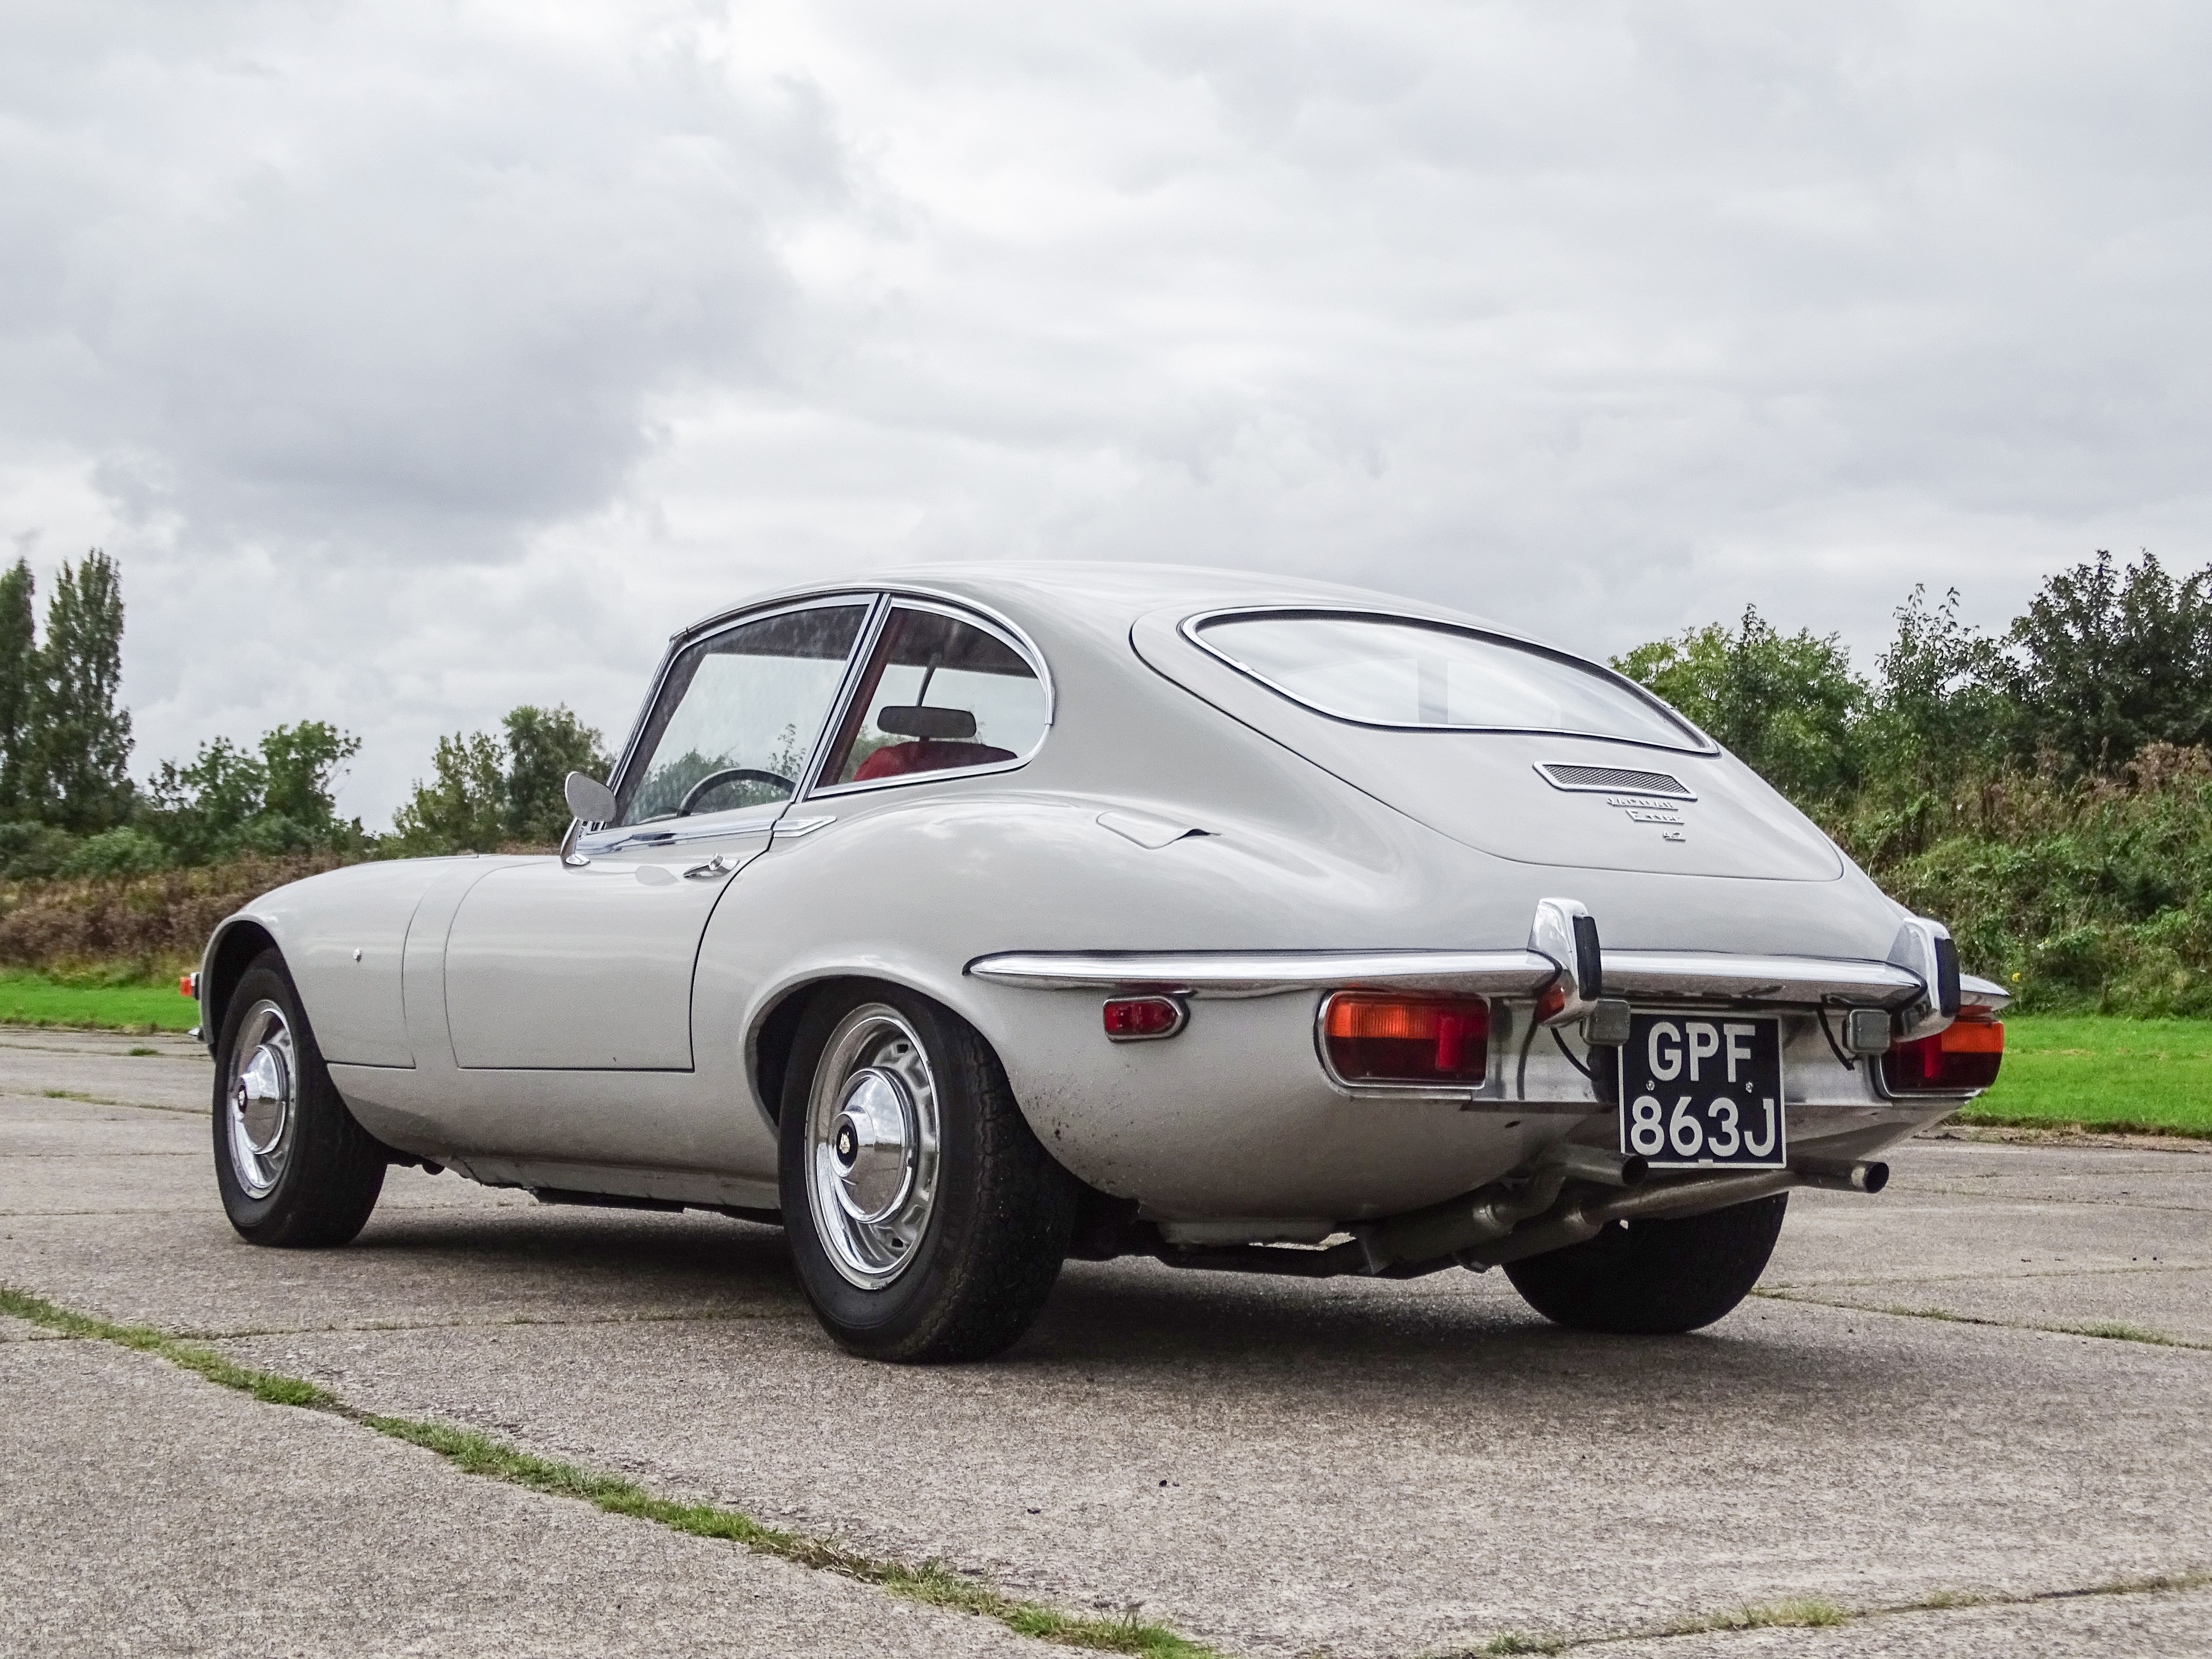 , ‘Ghost’ E-type reappears and heads to auction, ClassicCars.com Journal